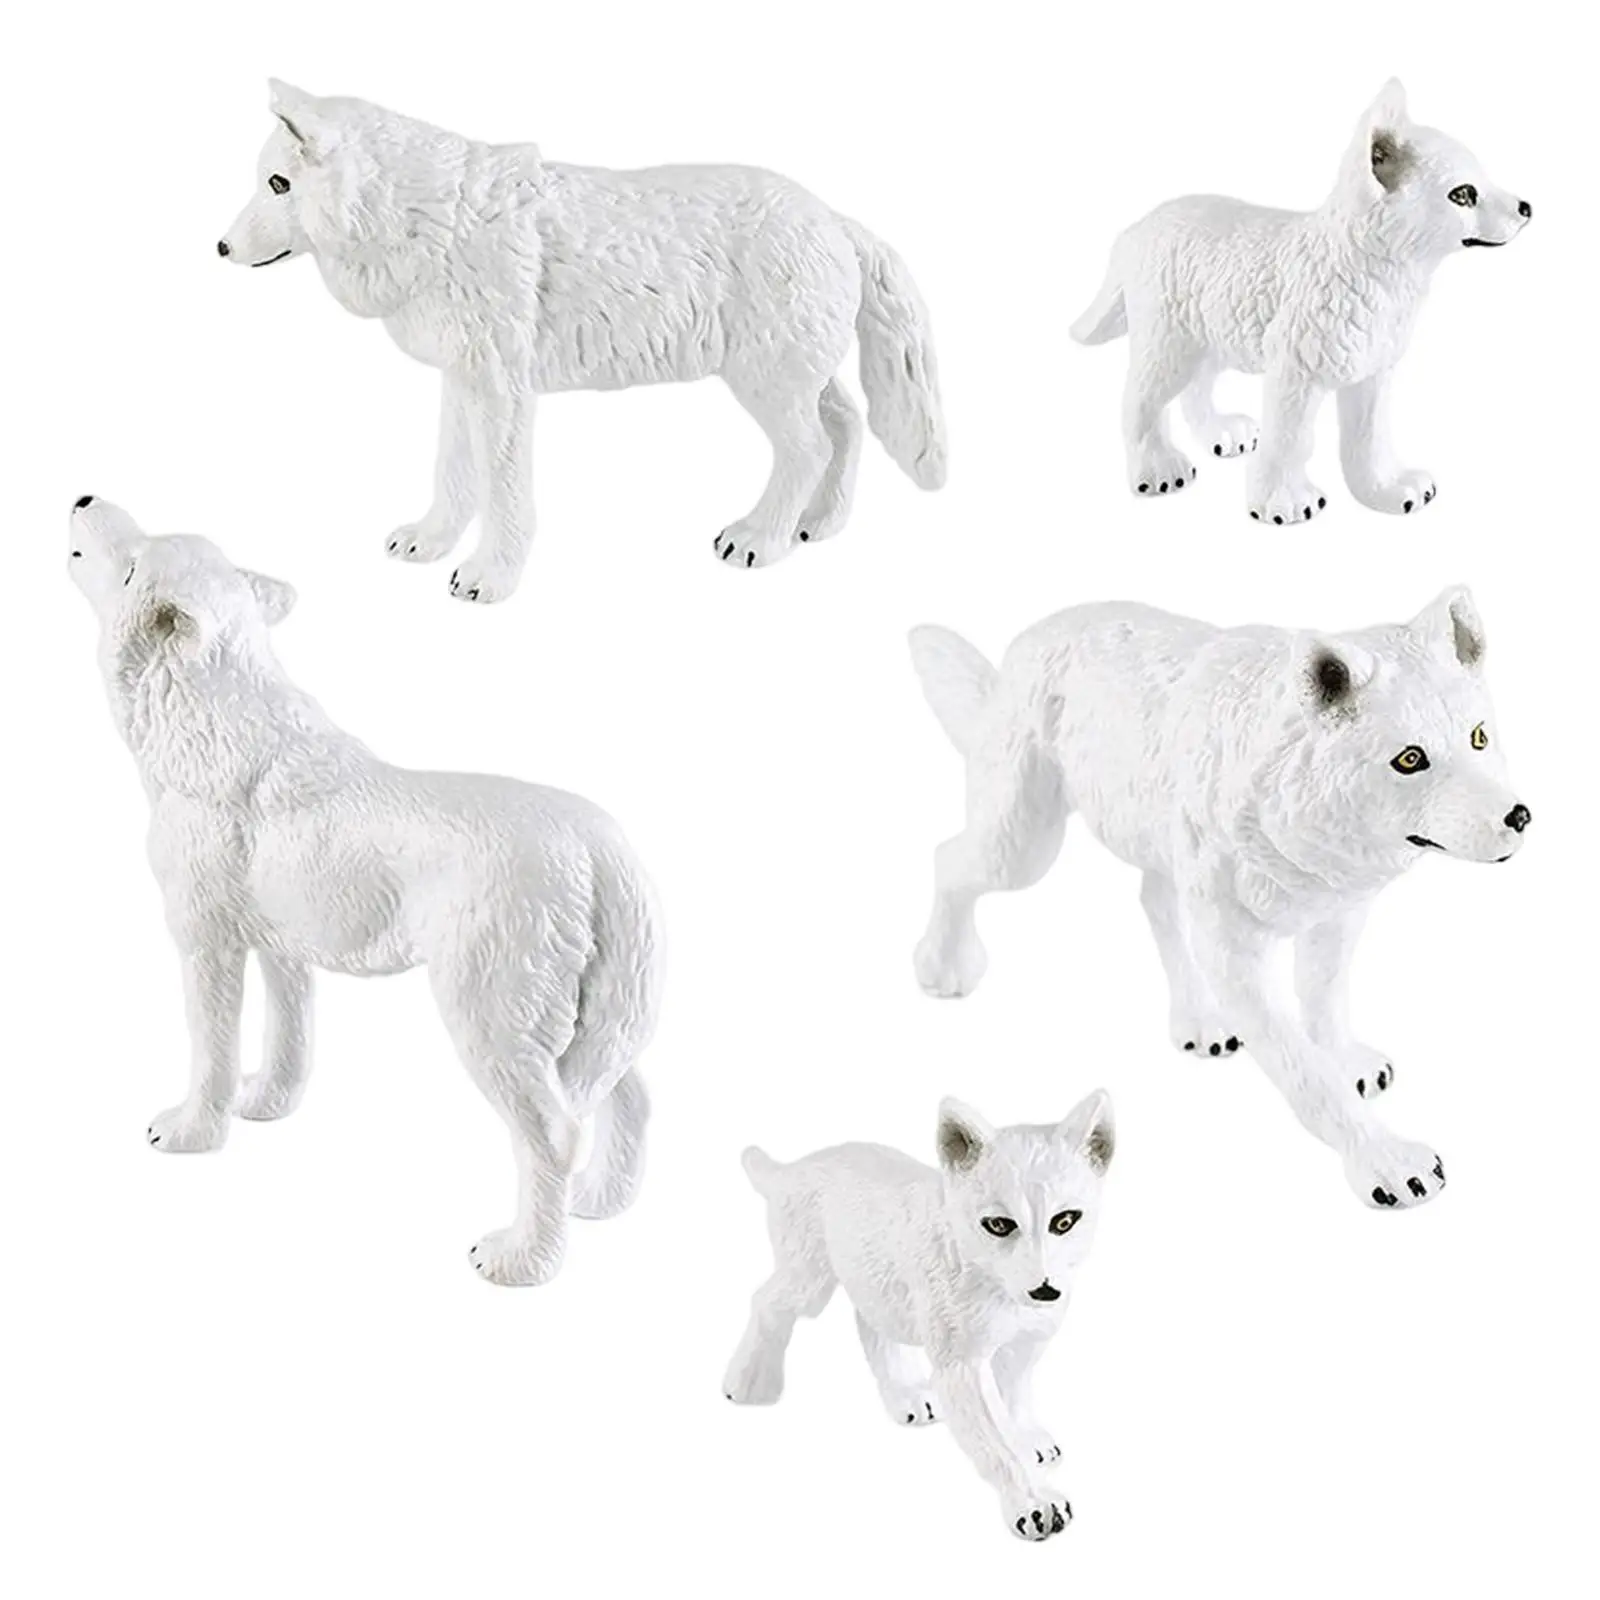 

5 Pieces Wolf Toys Figures Wolves Learning Preschool Gift Cognitive Toy Creatures Miniature Animal Toys Ages 3 and up Toddlers